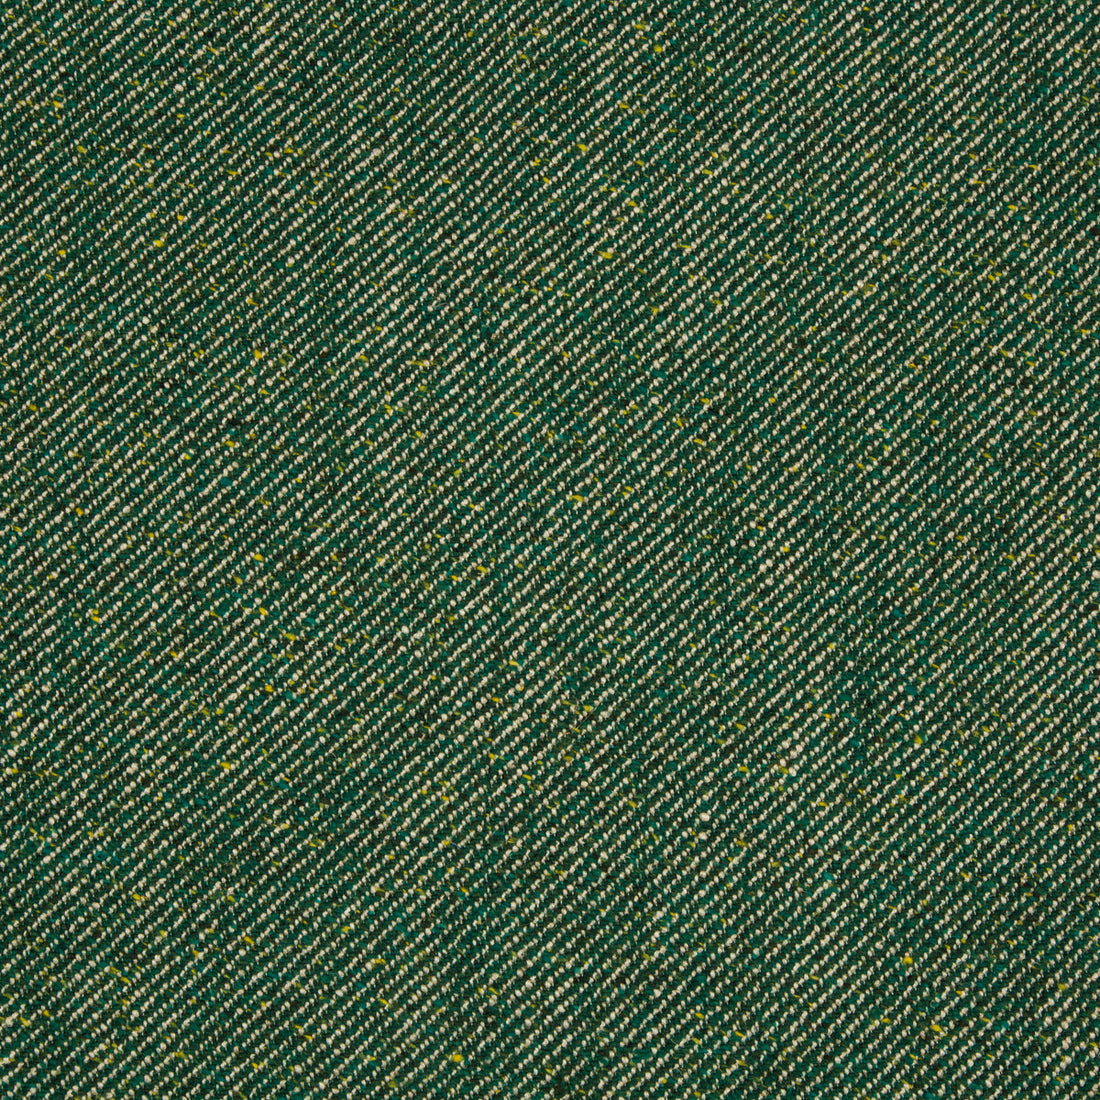 Blue Ridge Wool fabric in forest color - pattern 2017122.30.0 - by Lee Jofa in the Lodge II Weaves And Embroideries collection